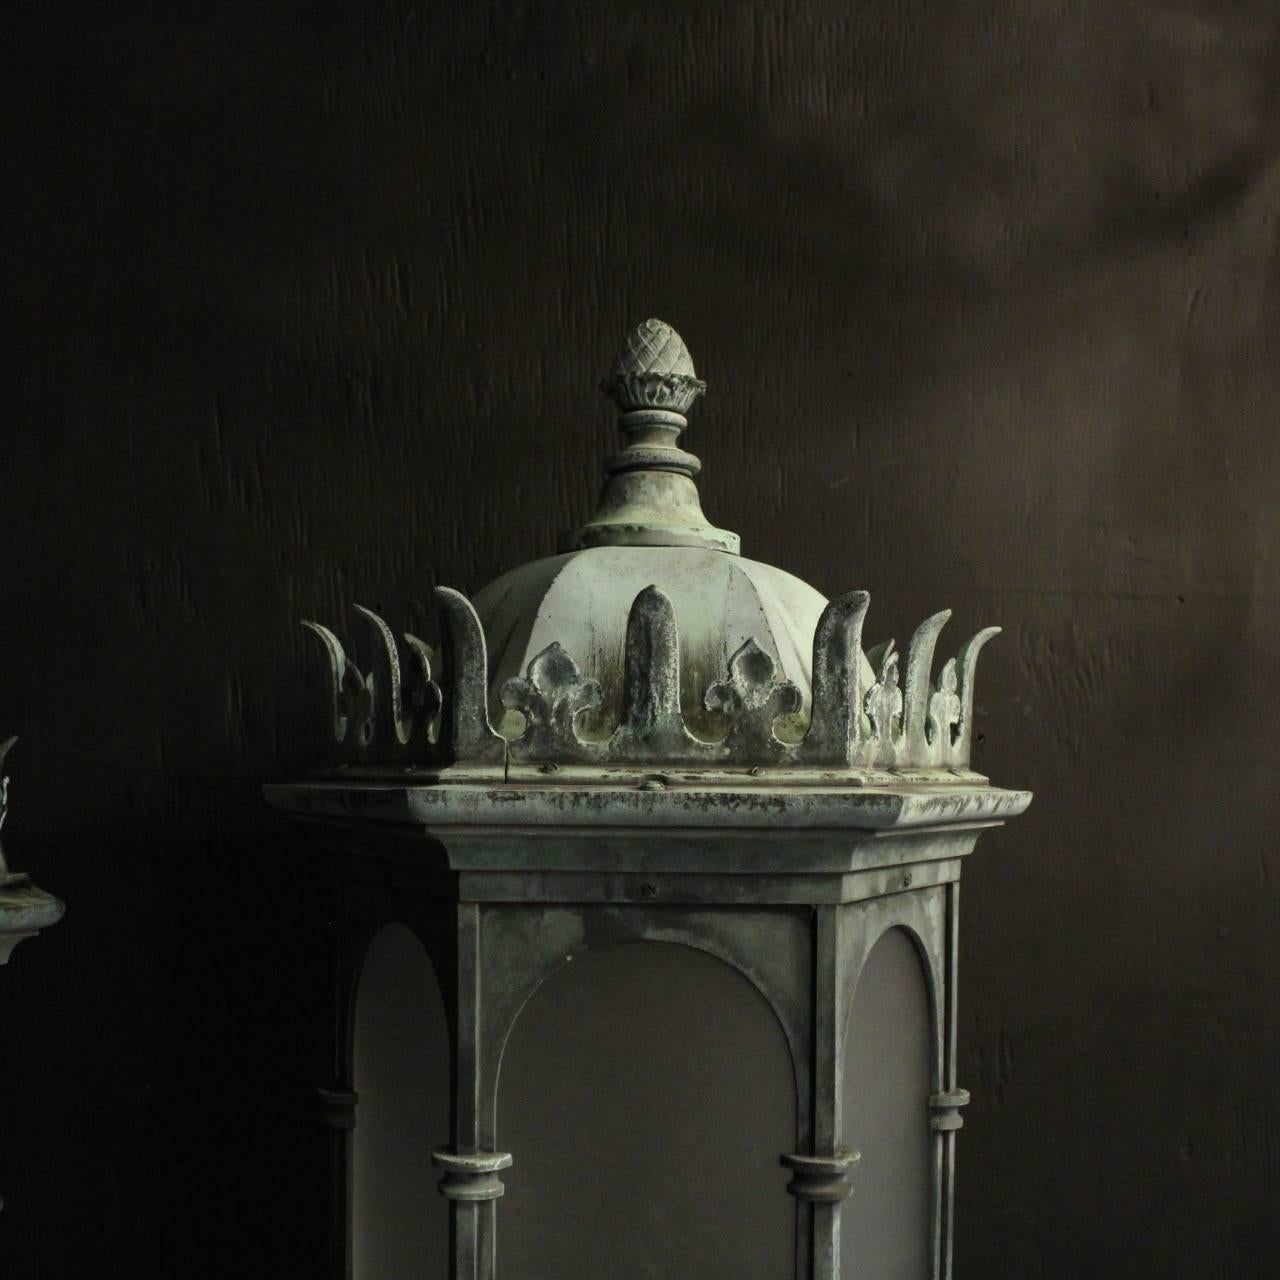 An English pair of Gothic single light bronze external antique wall lanterns, the scrolling acanthus clad arms issuing from an hexagonal backplate surrounded by six frosted sectional glass panels which are held within an ornate scrolling bronze